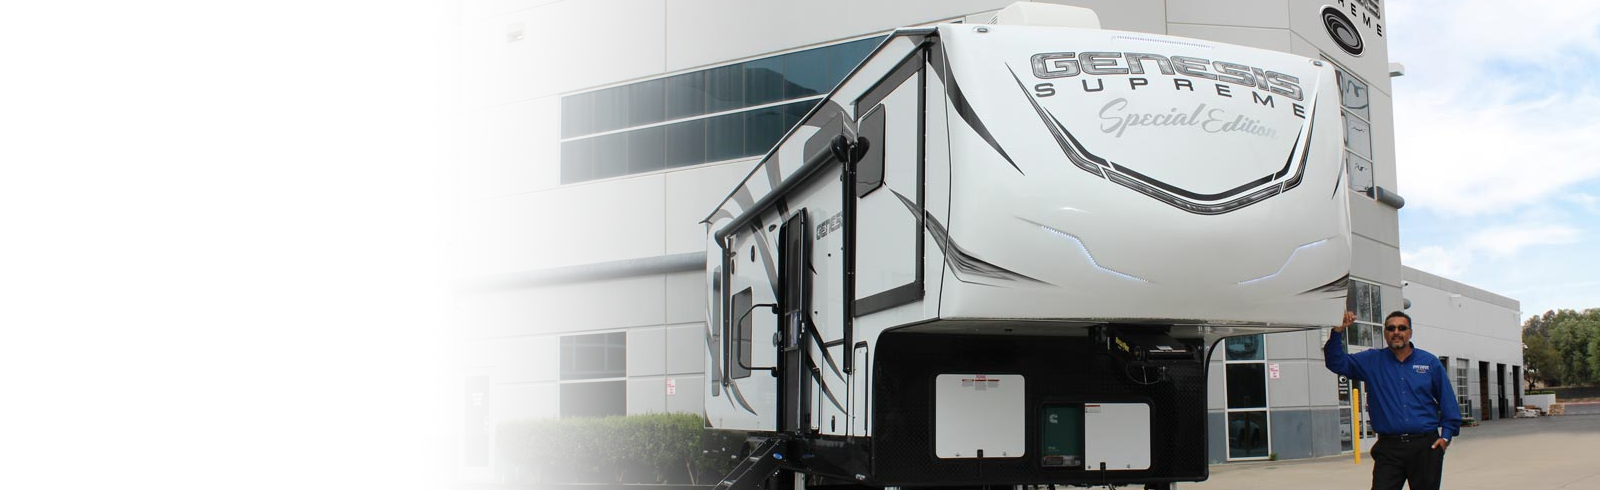 Picture from Genesis Supreme of Fifth wheel camper